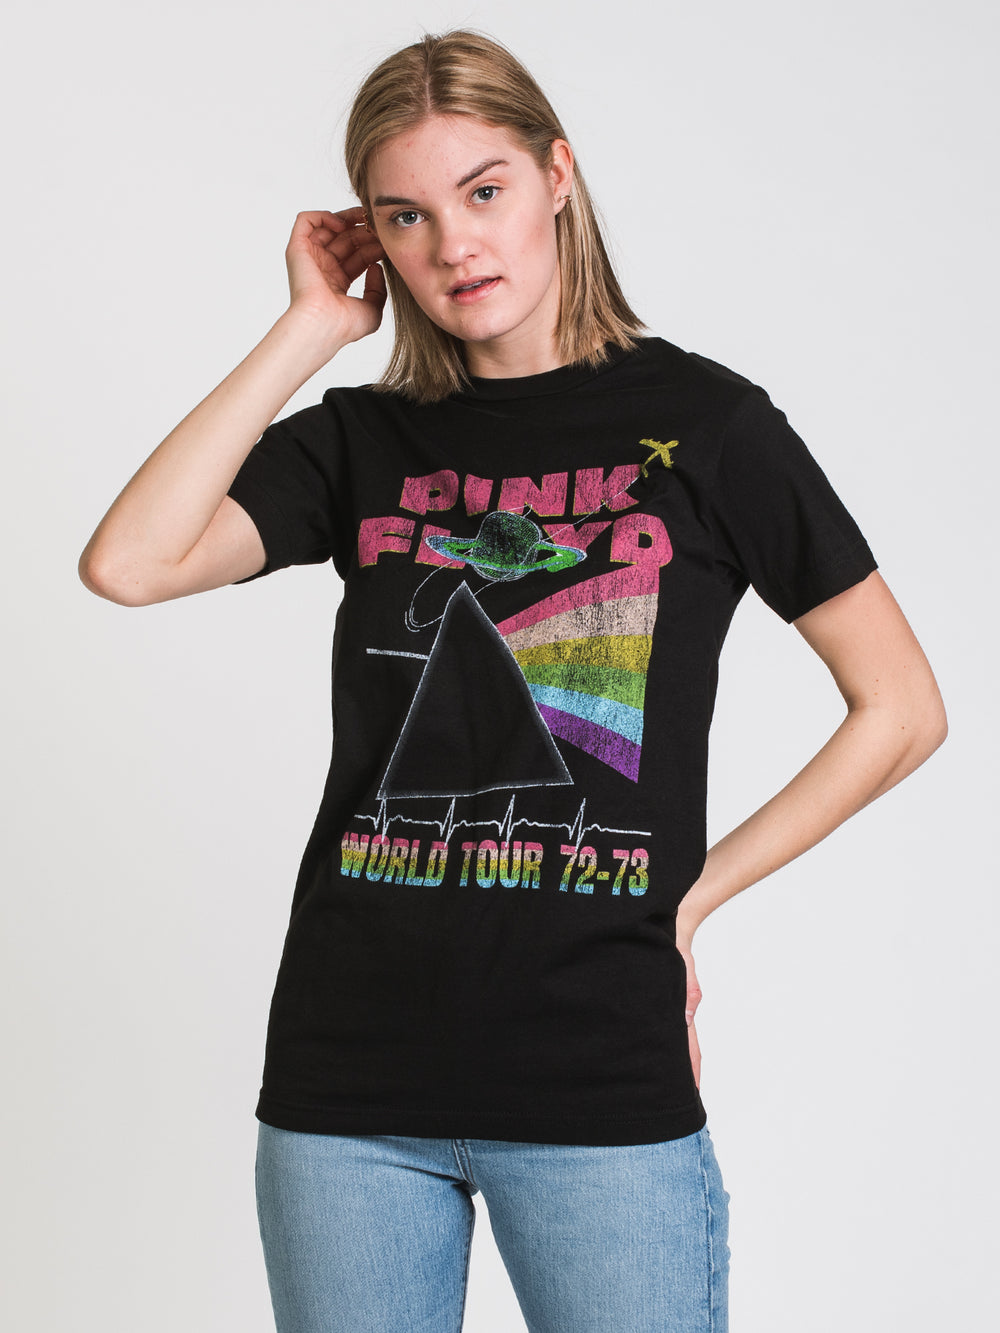 GOODIE TWO SLEEVE WORLD PRISM TOUR T-SHIRT-BLACK - CLEARANCE